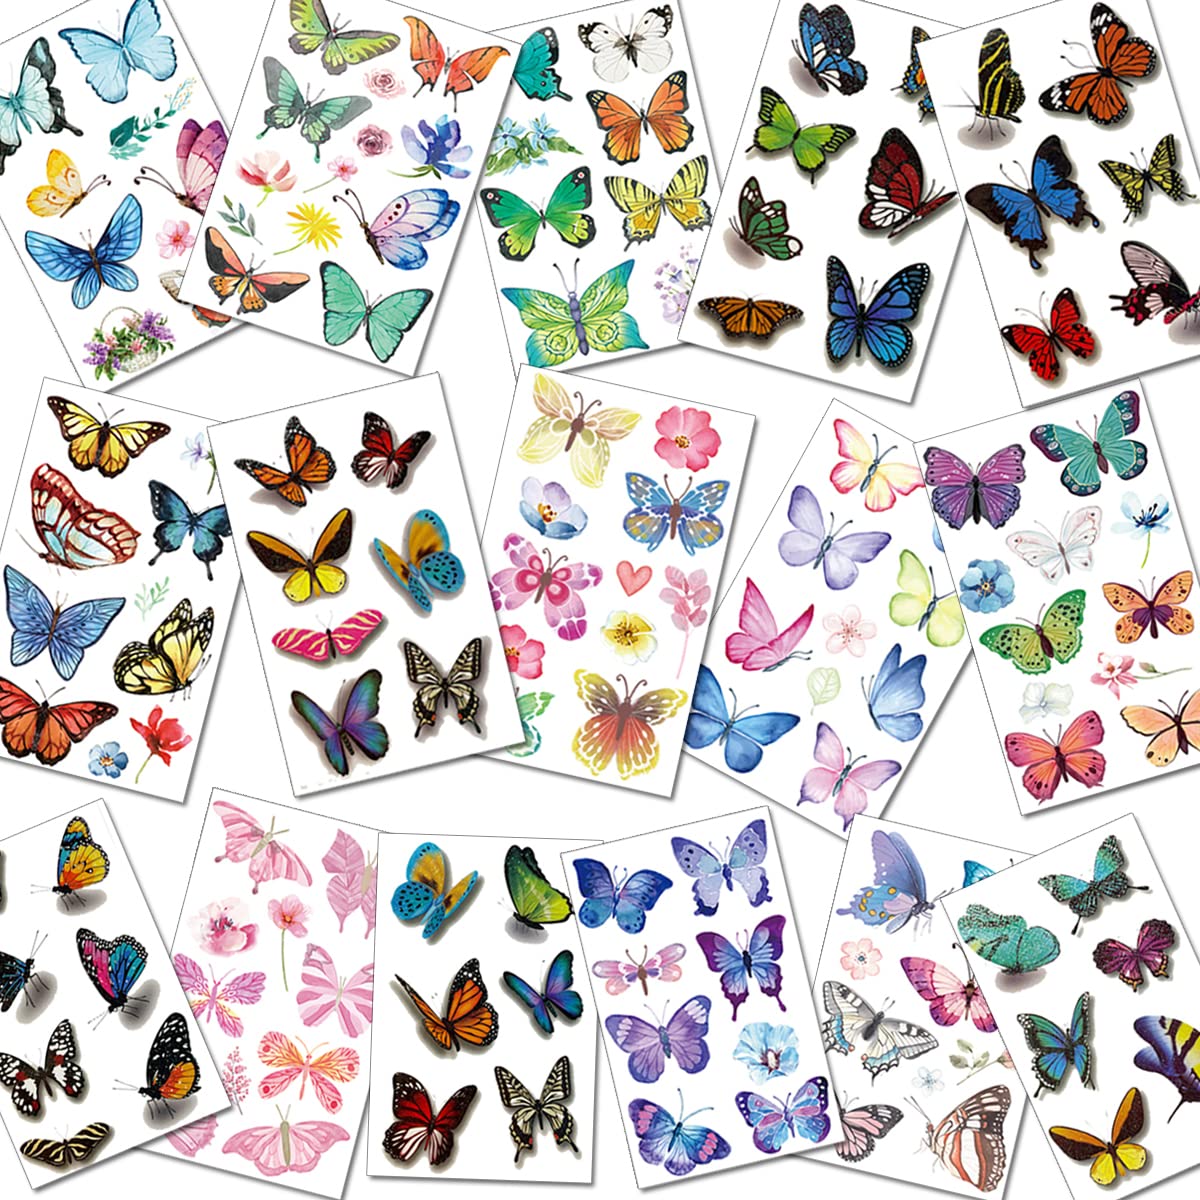 Tazimi 110 Styles Butterfly Temporary Tattoos for Kids Women,Glitter Butterfly Tattoos For Party Favors Gifts Decoration